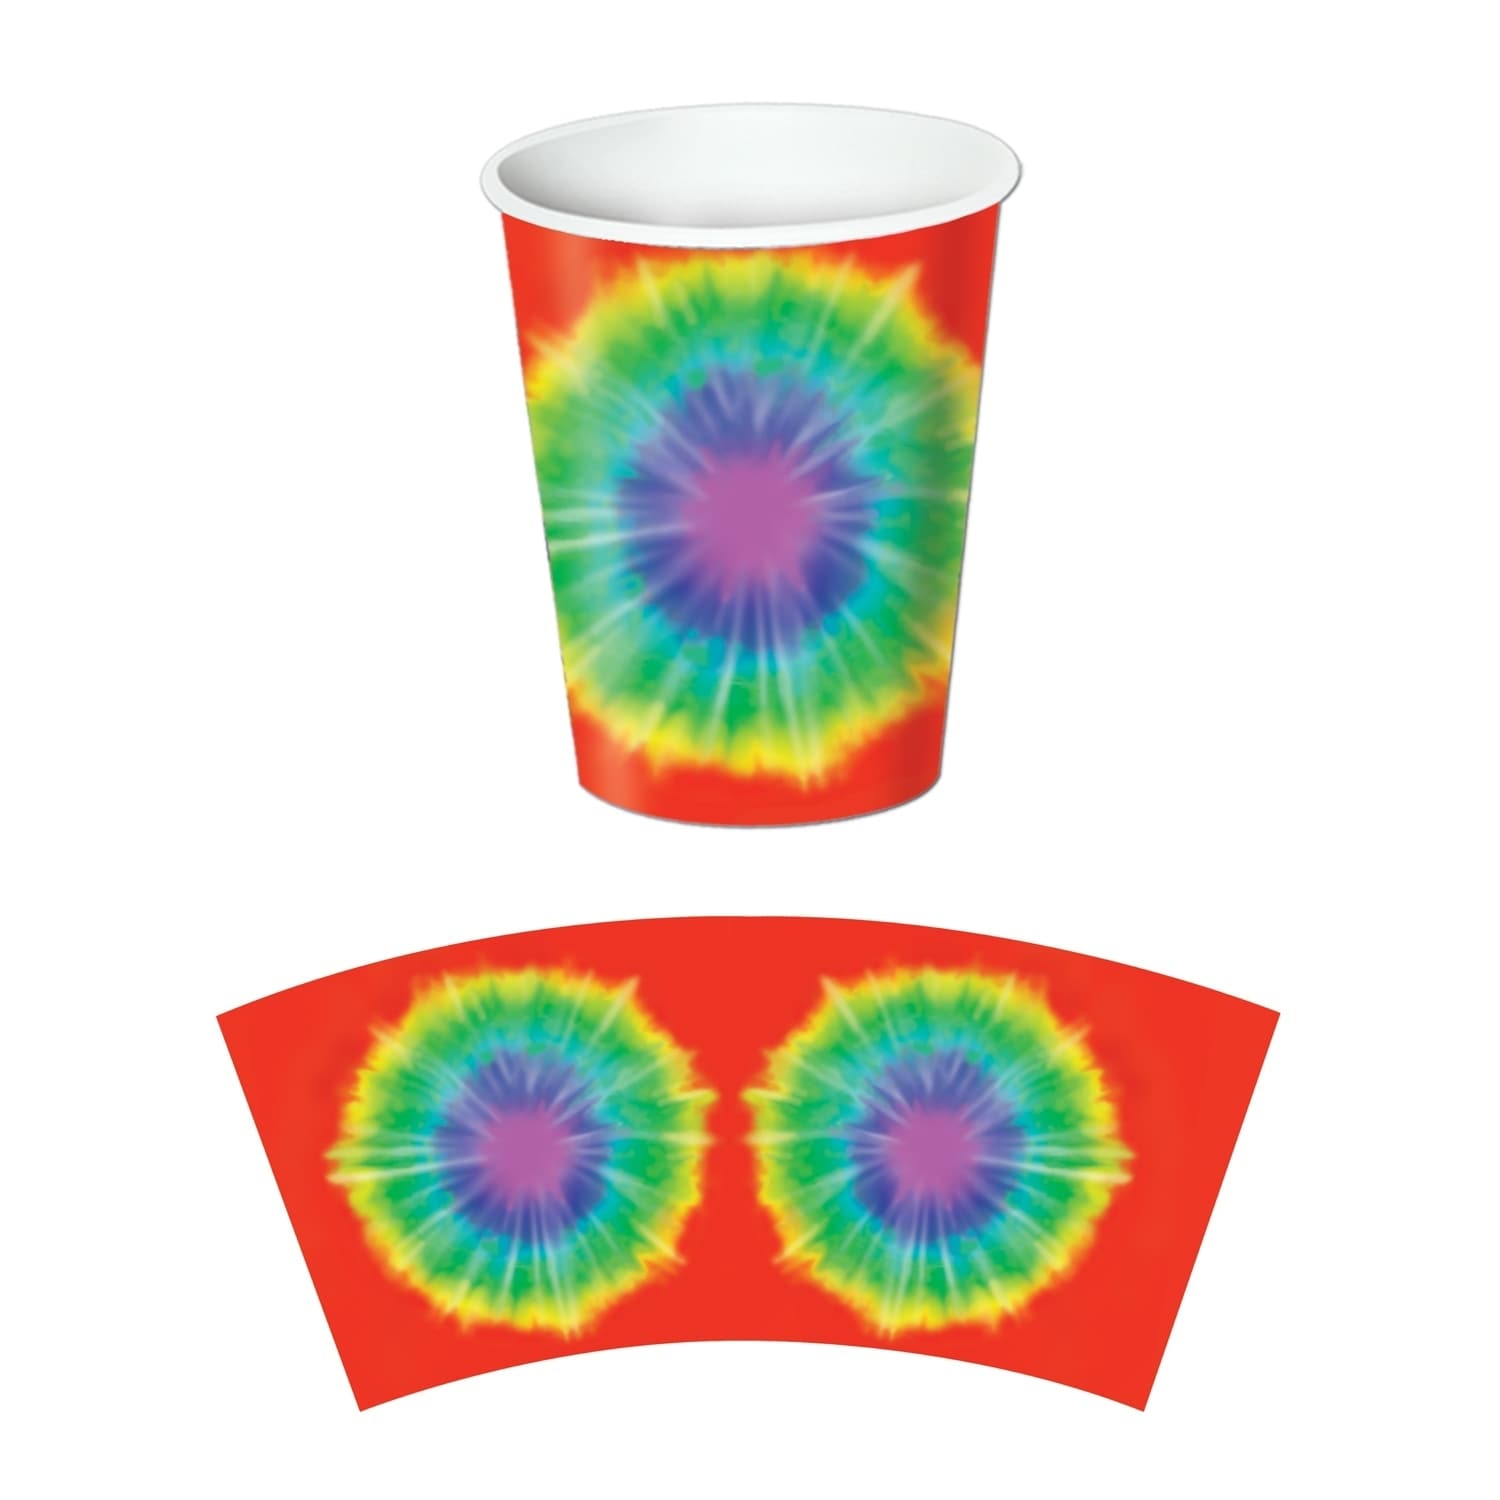 Beistle 60's Theme Tie Dyed Party Beverage Cups, 9 Oz - 12 Pack (8/Pkg)